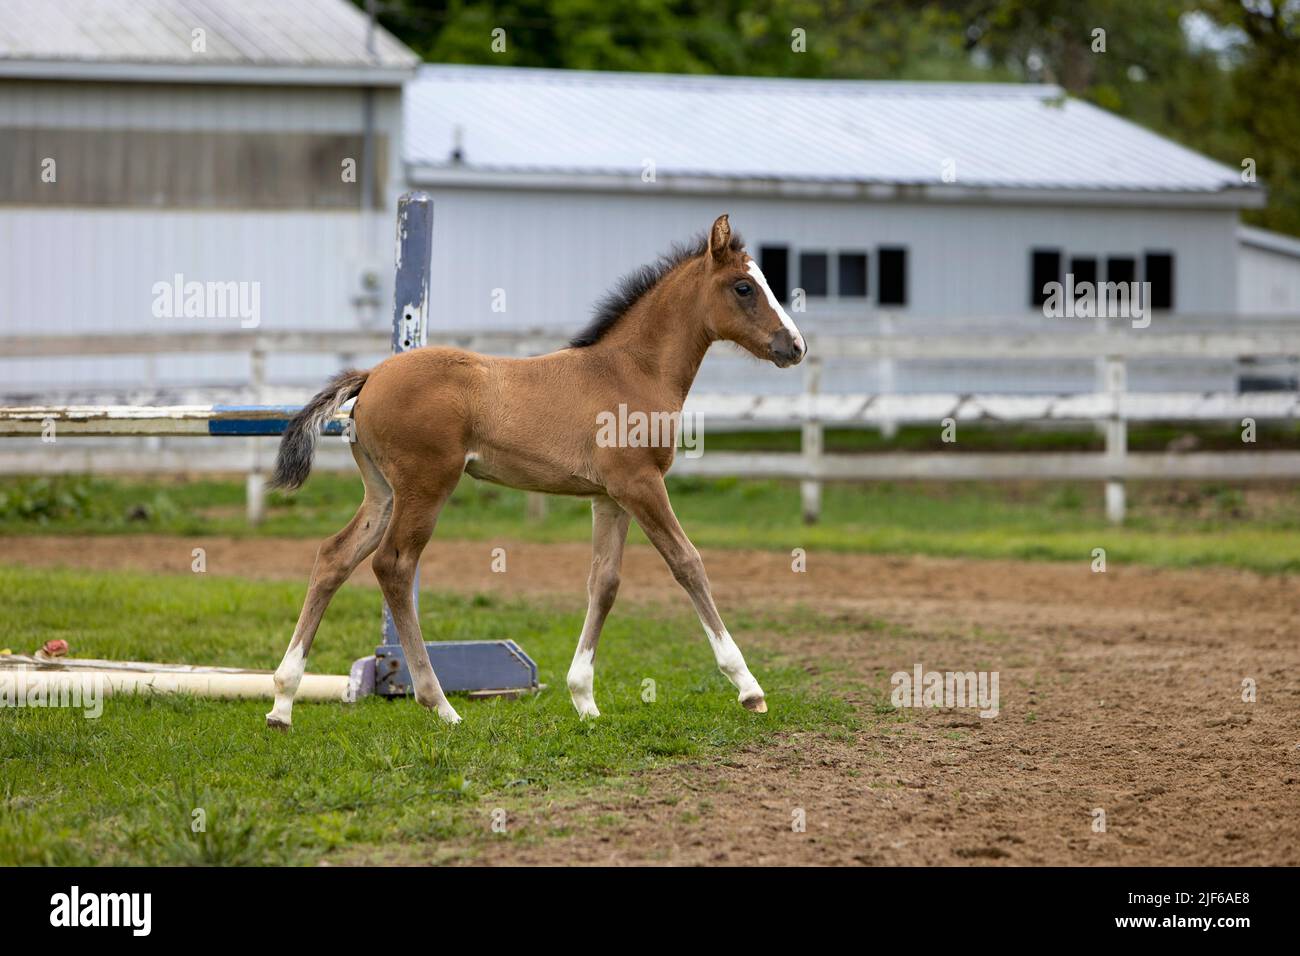 A foal walking alone in a paddock at a horse farm. Stock Photo